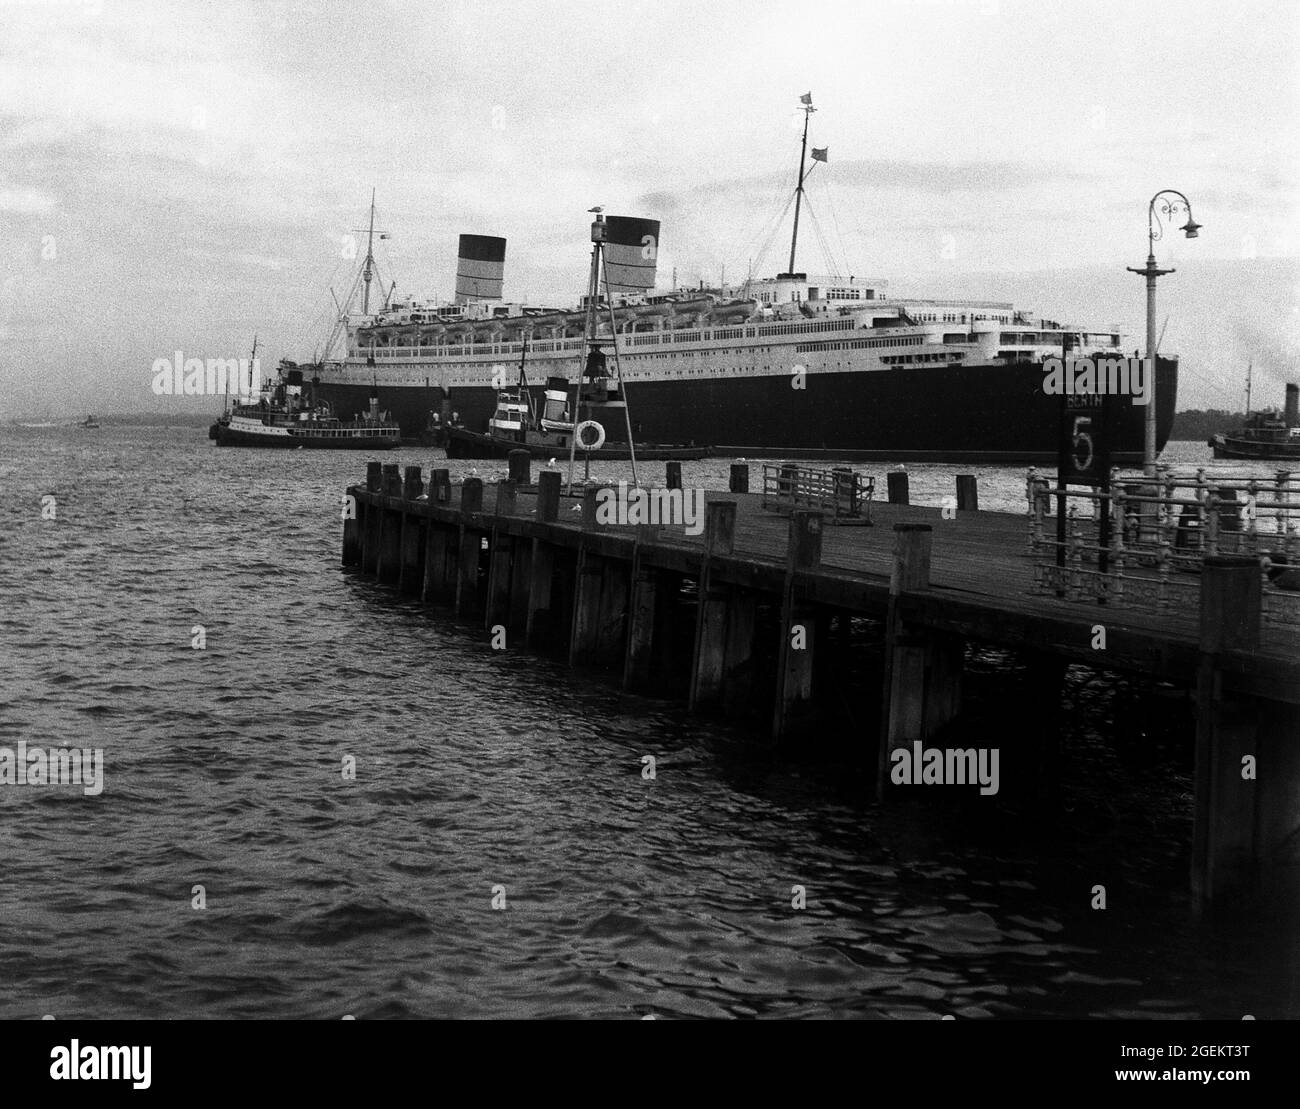 AJAXNETPHOTO. 1960S. SOUTHAMPTON, ENGLAND. - OUTWARD BOUND - CUNARD TRANSATLANTIC LINER RMS QUEEN ELIZABETH WITH TUGS IN ASSISTANCE, DEPARTS ON ONE OF HER REGULAR SCHEDULED SAILINGS TO NEW YORK.PHOTO:©SUSANNAH RITCHIE COLLECTION/AJAX REF:SR1960S 41 Stock Photo